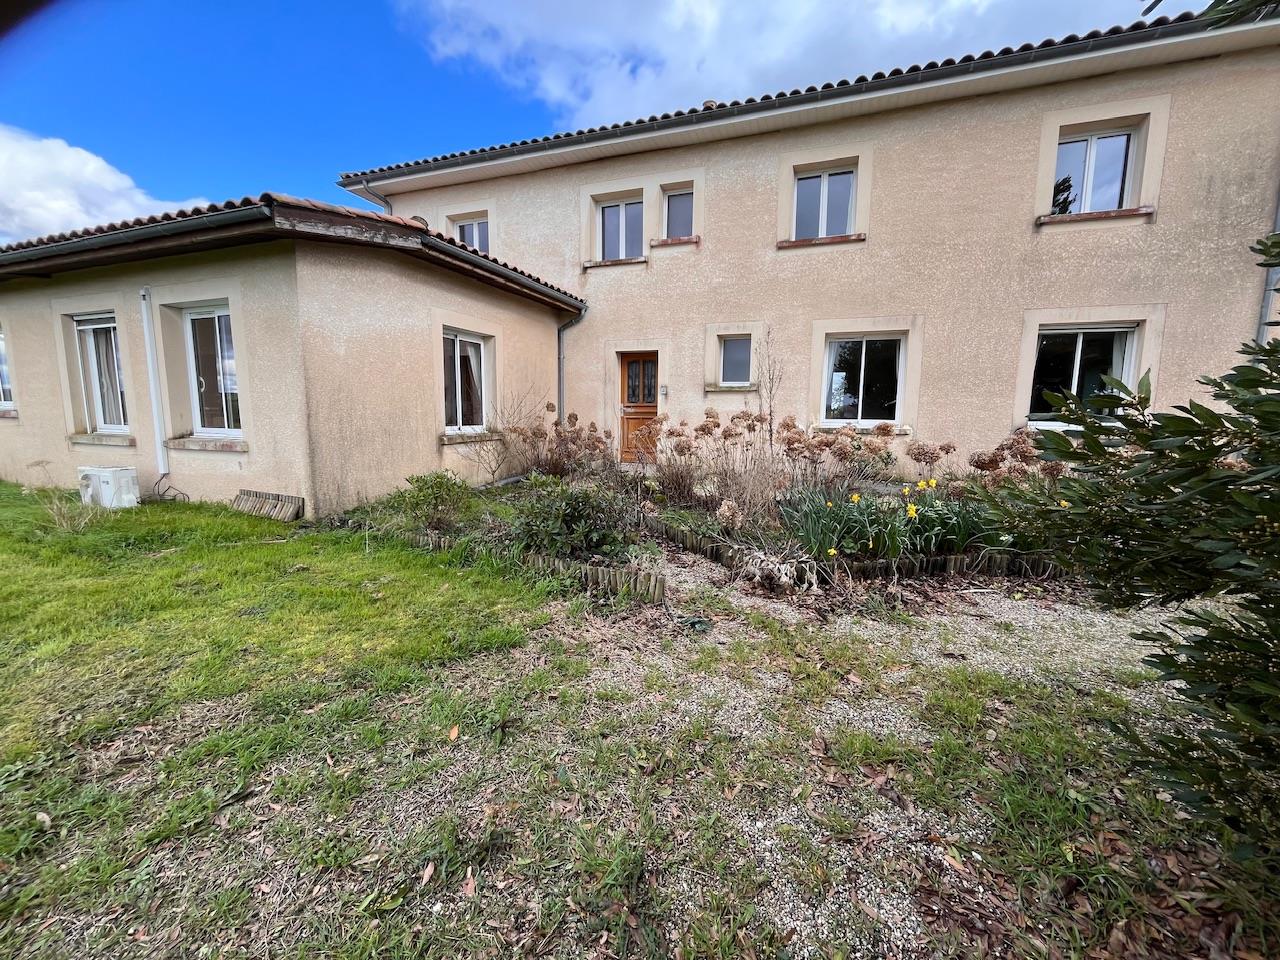 Very nice property located on a hill with land around, swimming pool and large garage